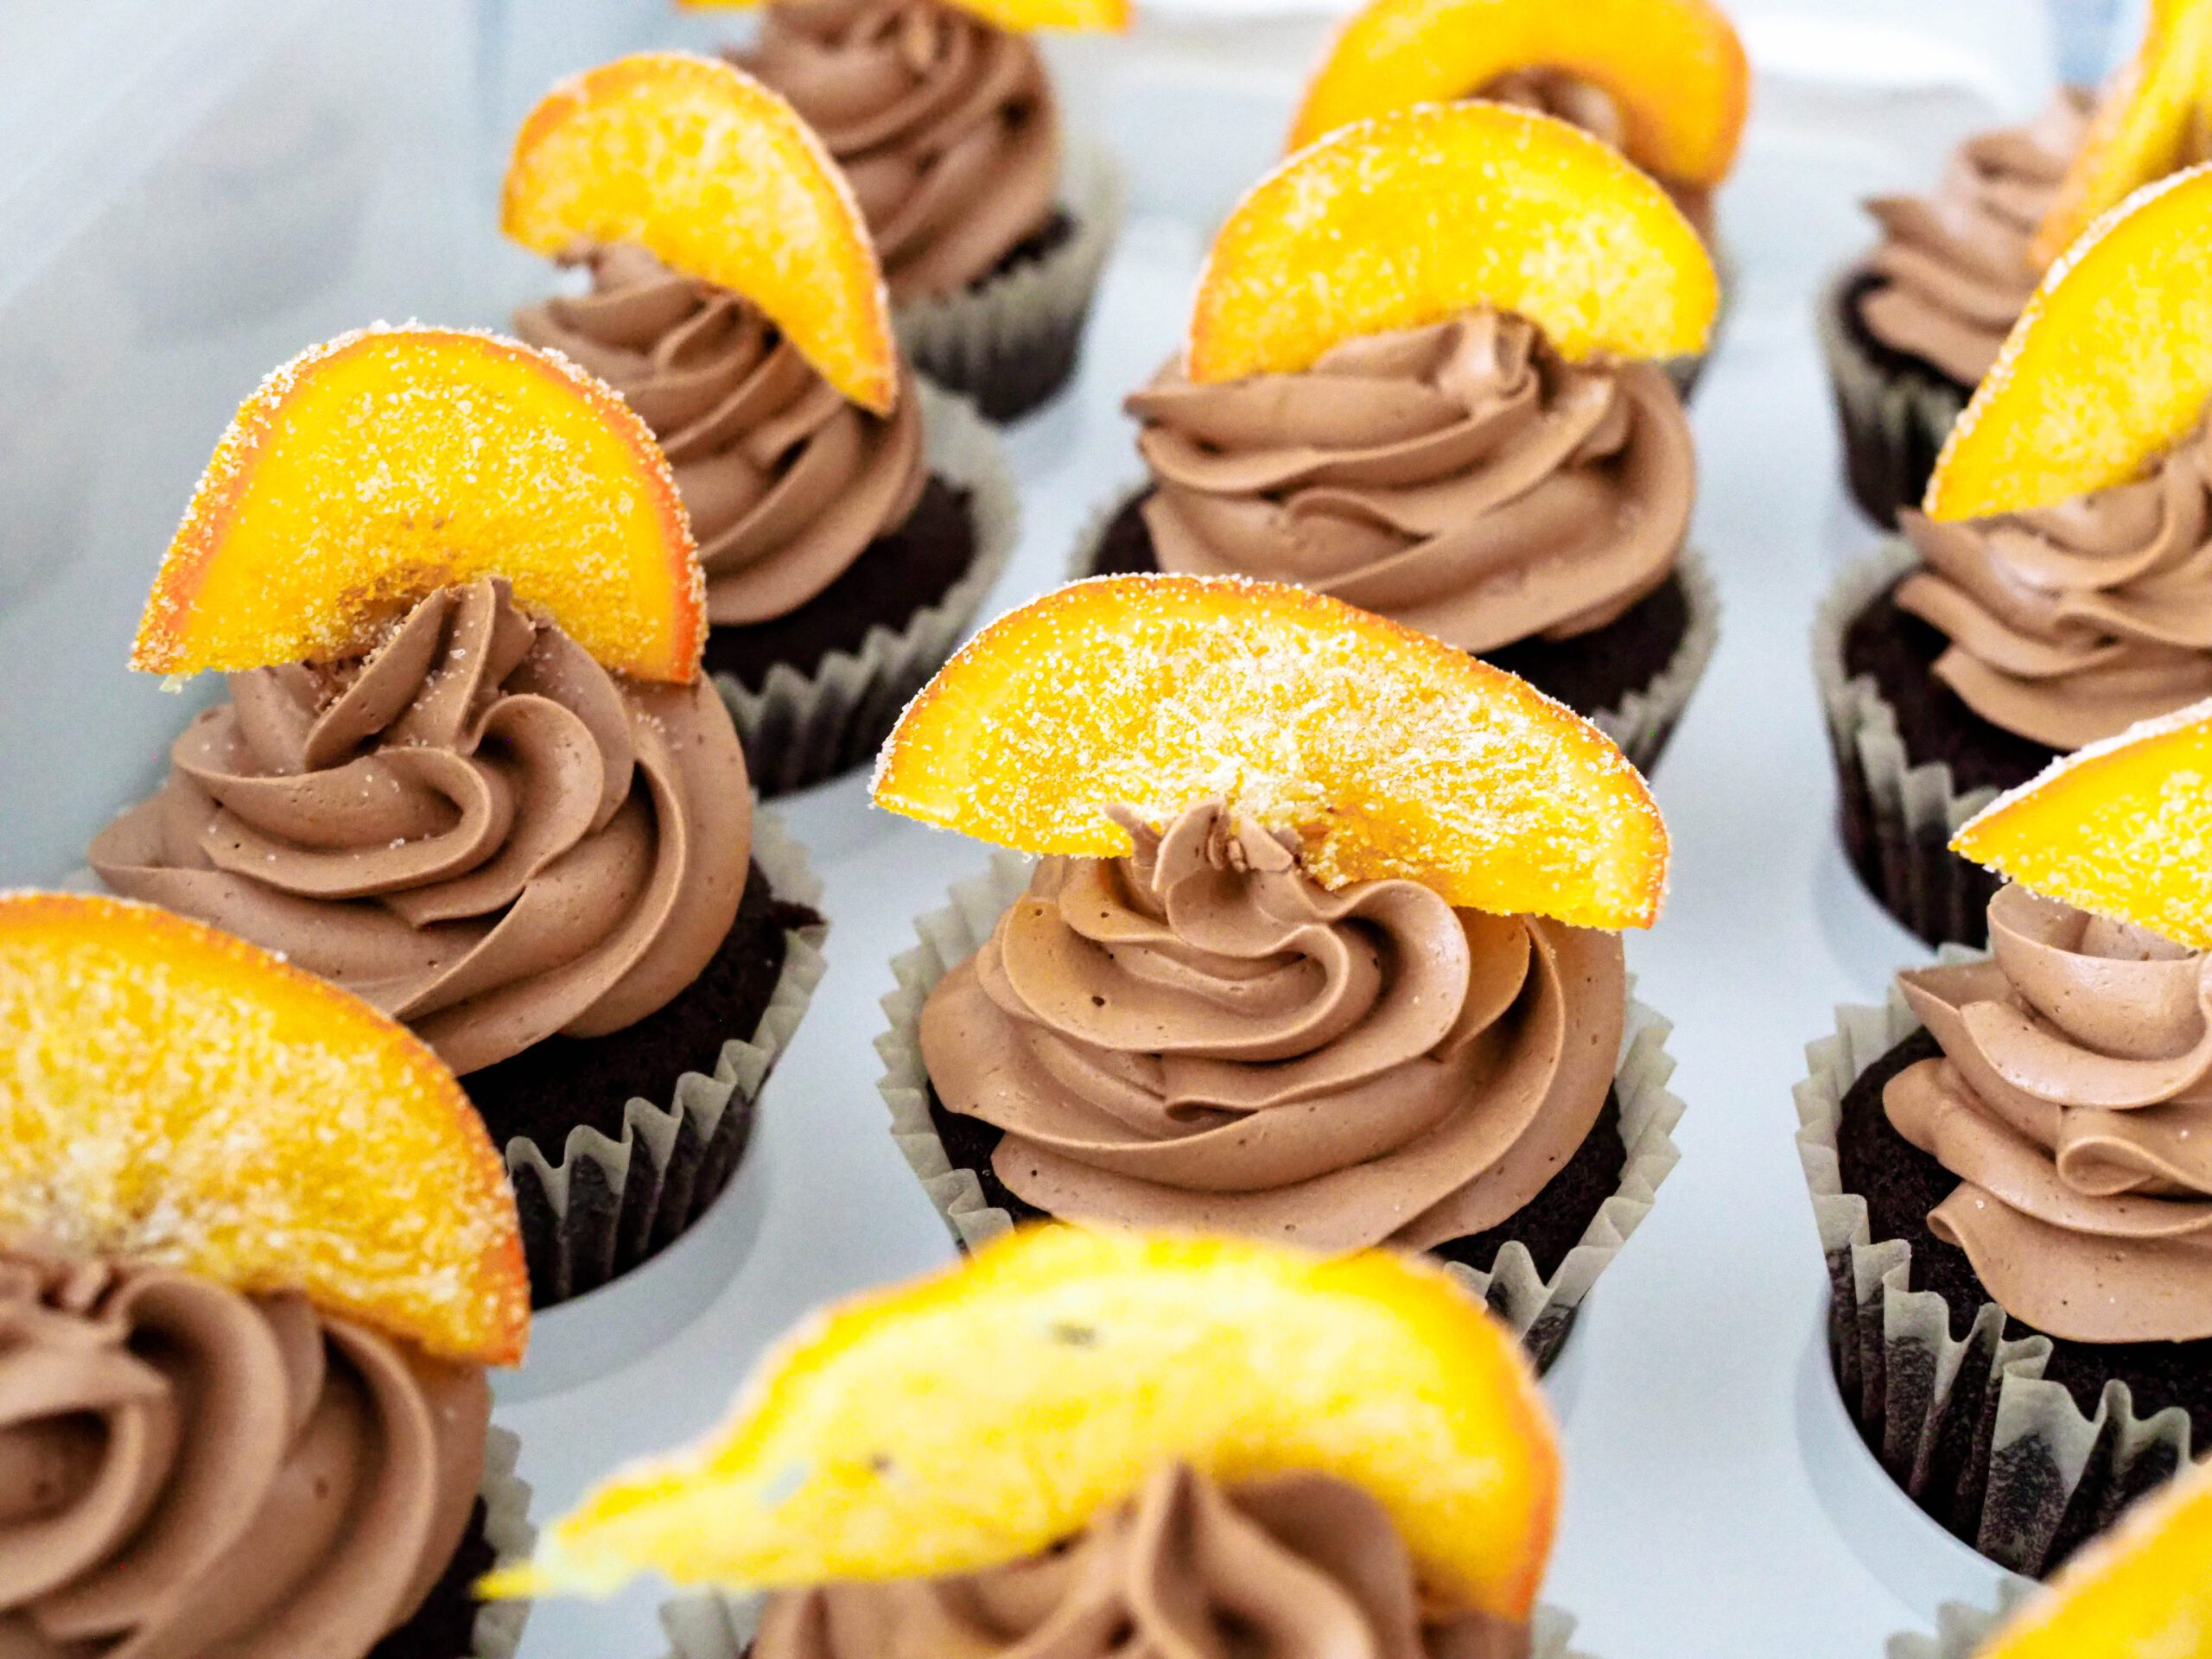 Gluten-free, dairy-free chocolate orange cupcakes with a candied orange on top of a swirl of chocolate French buttercream.